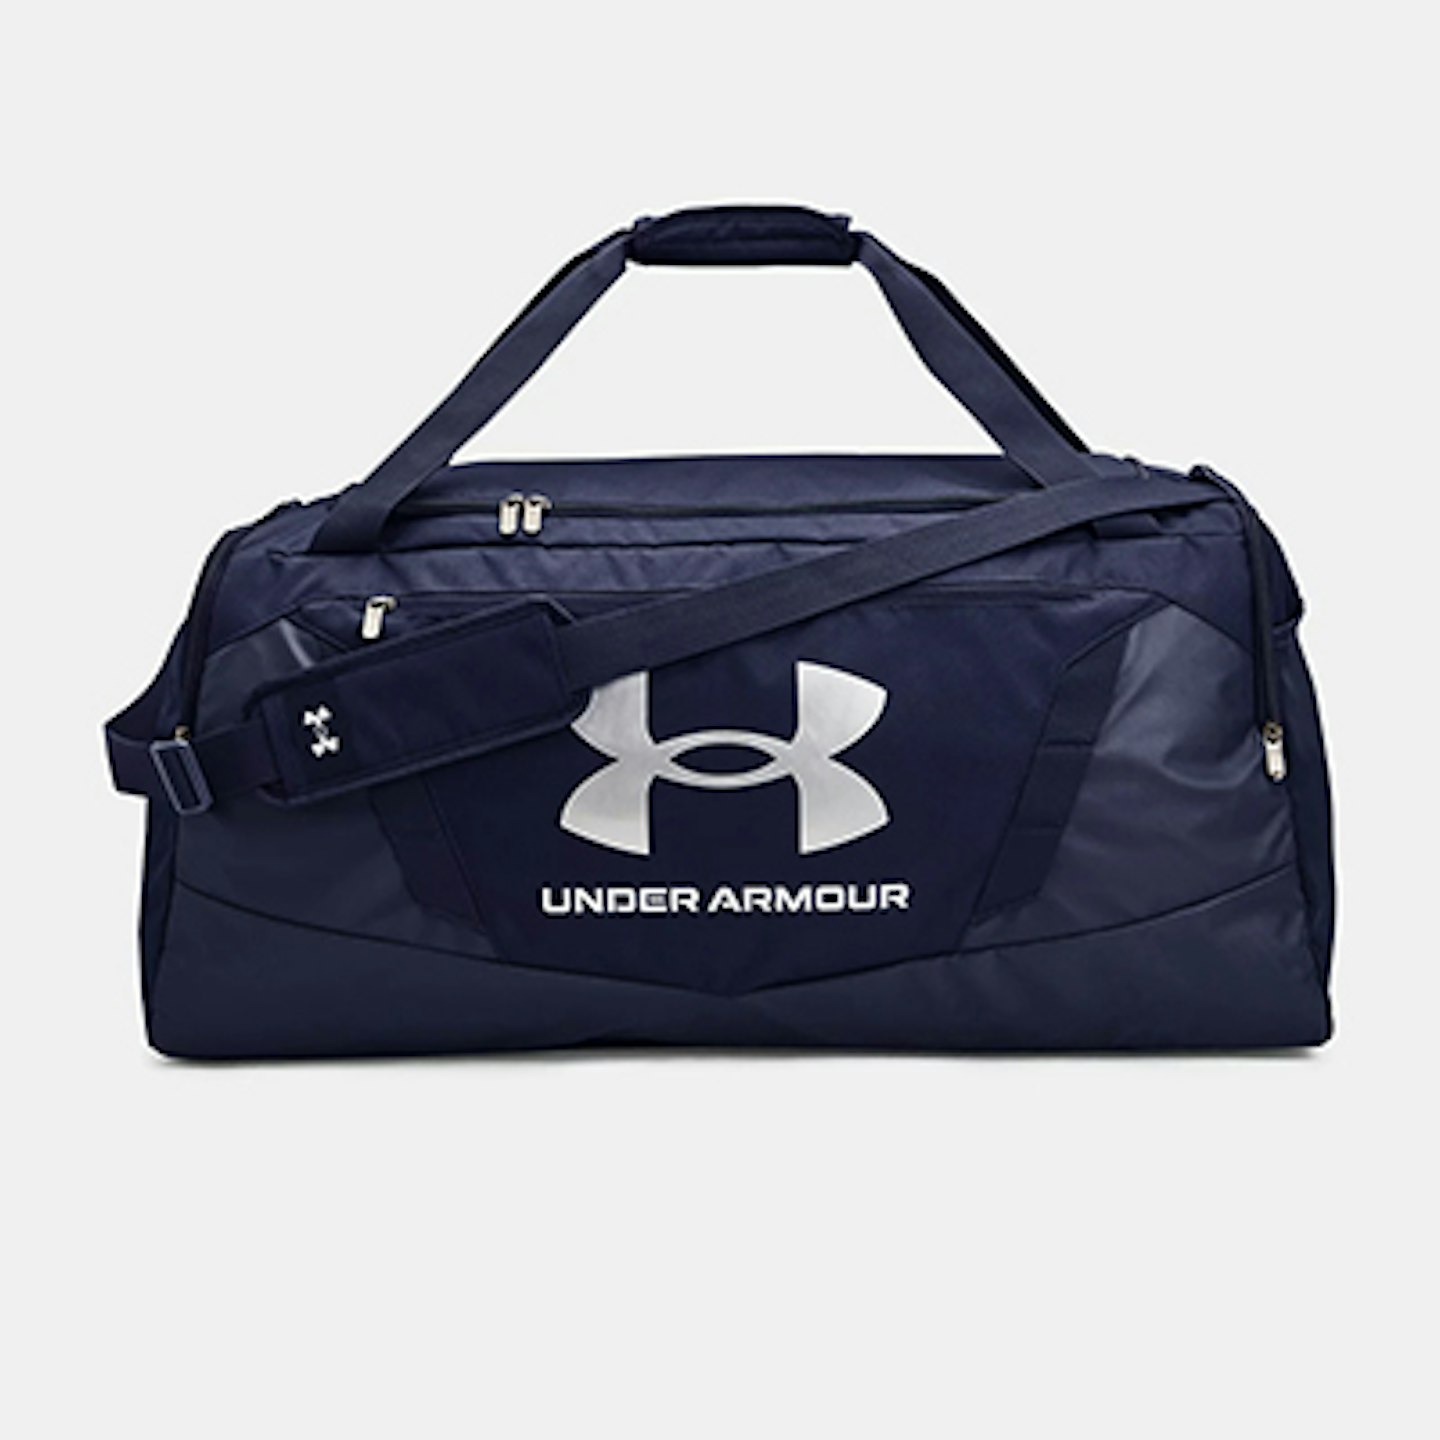 Under Armour gym bags